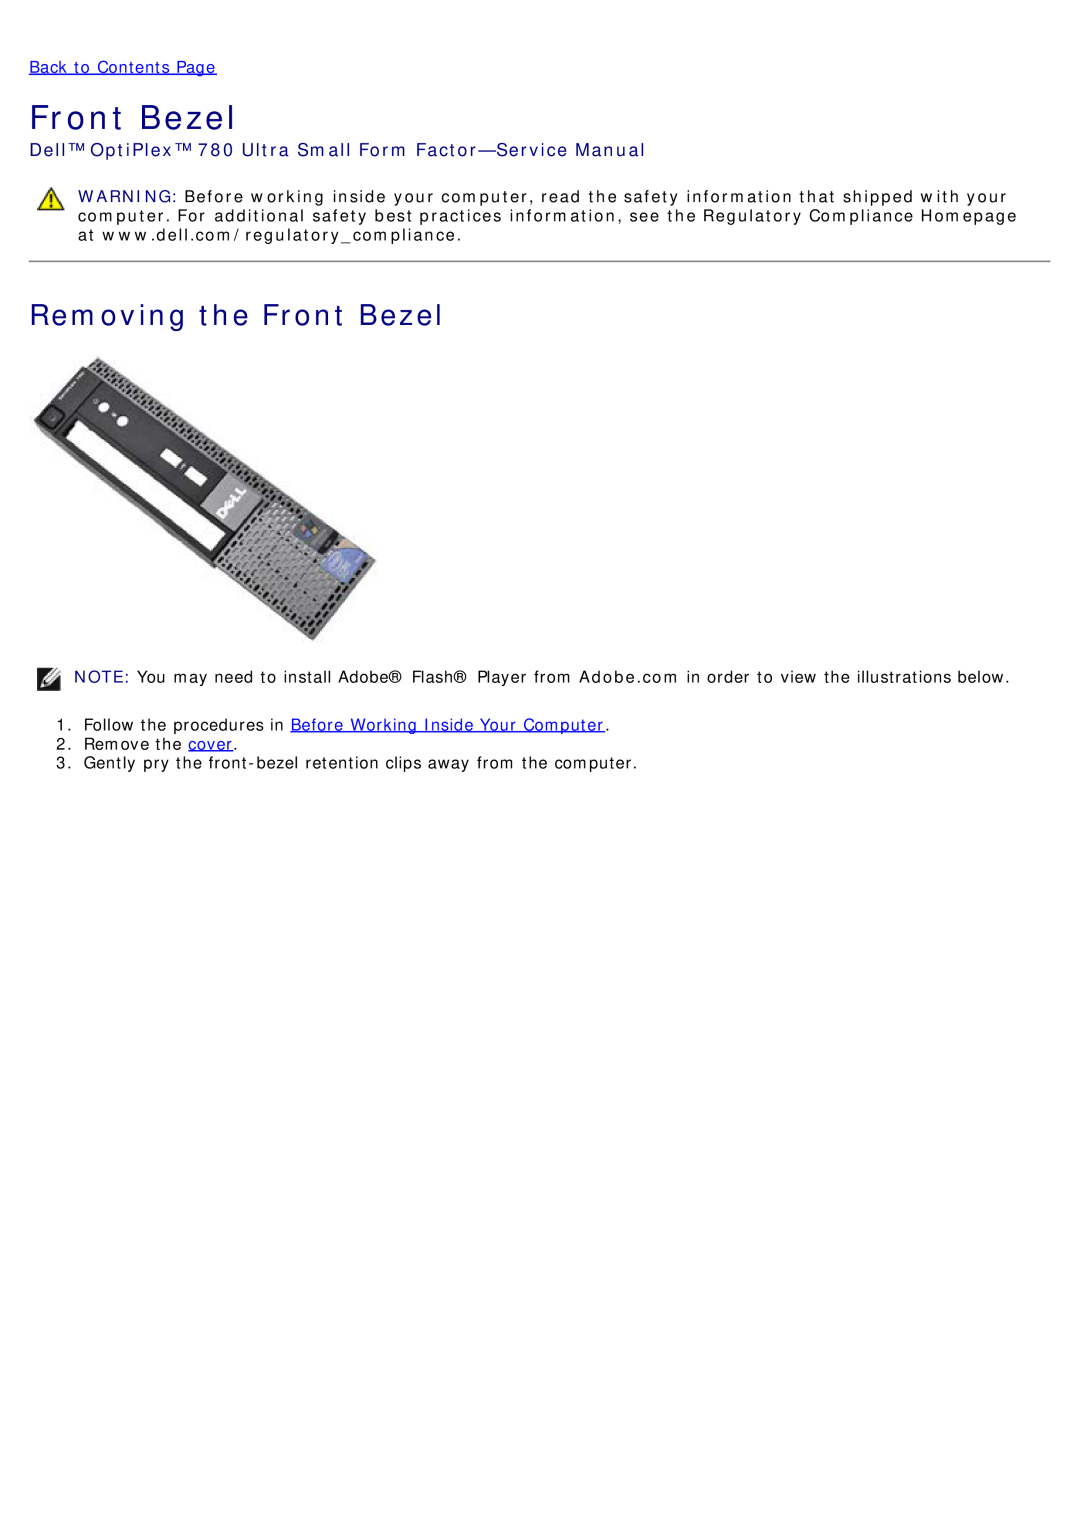 Dell Removing the Front Bezel, Dell OptiPlex 780 Ultra Small Form Factor-Service Manual, Back to Contents Page 